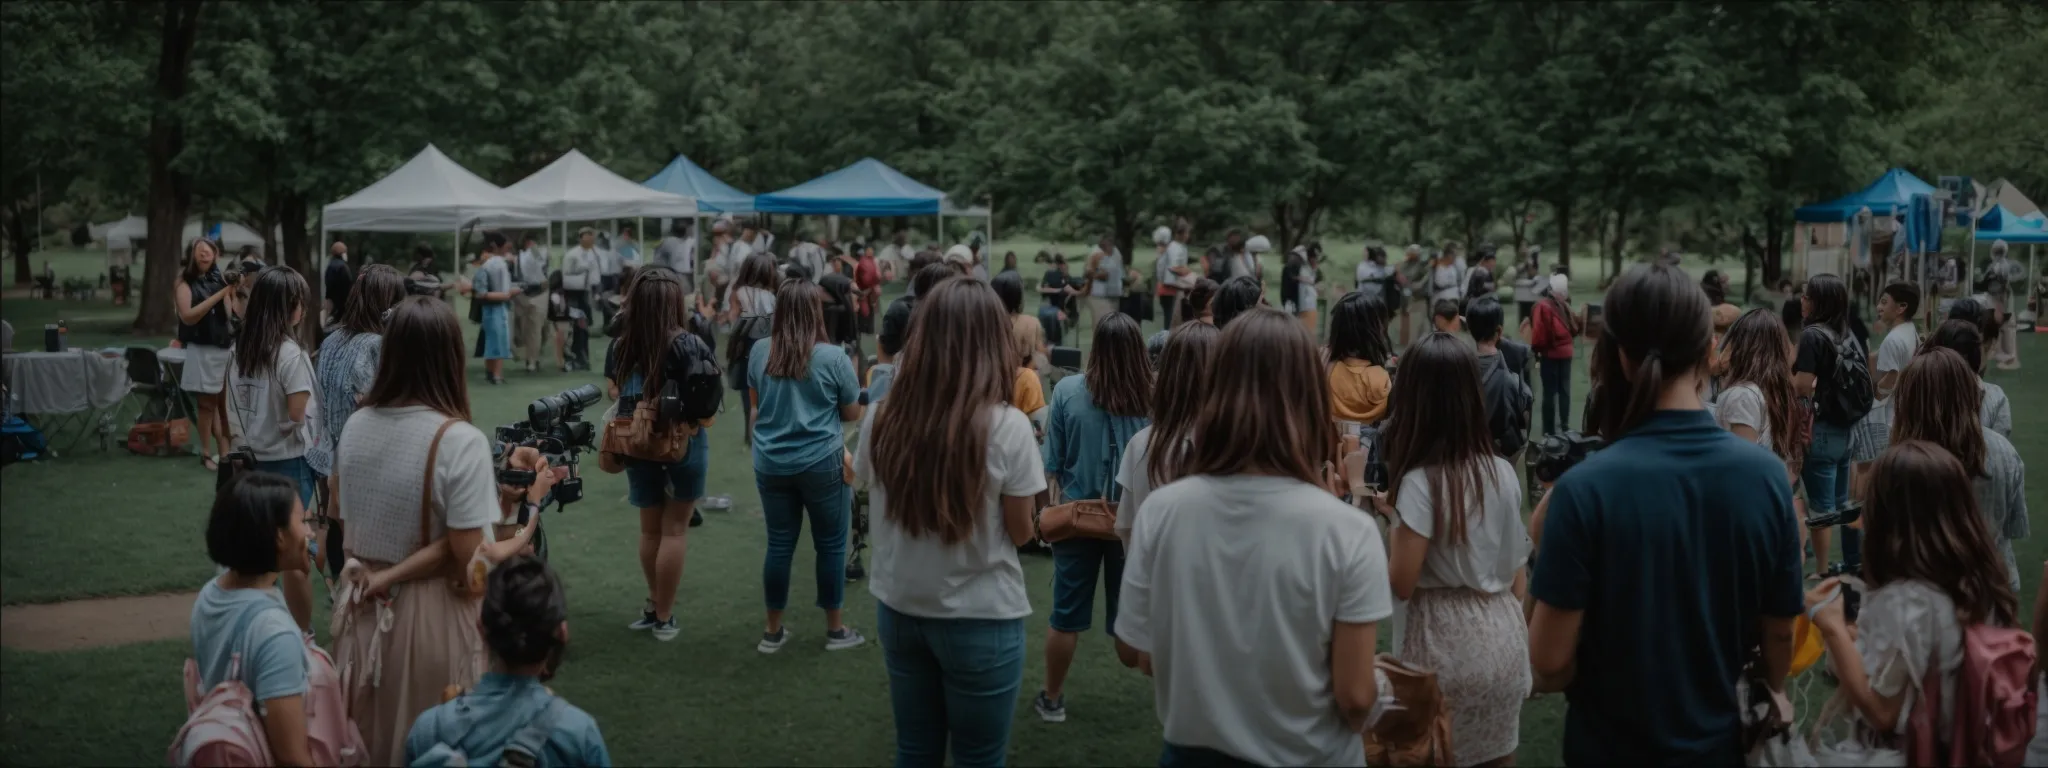 a nonprofit team holding a community event in a local park to foster engagement and awareness.